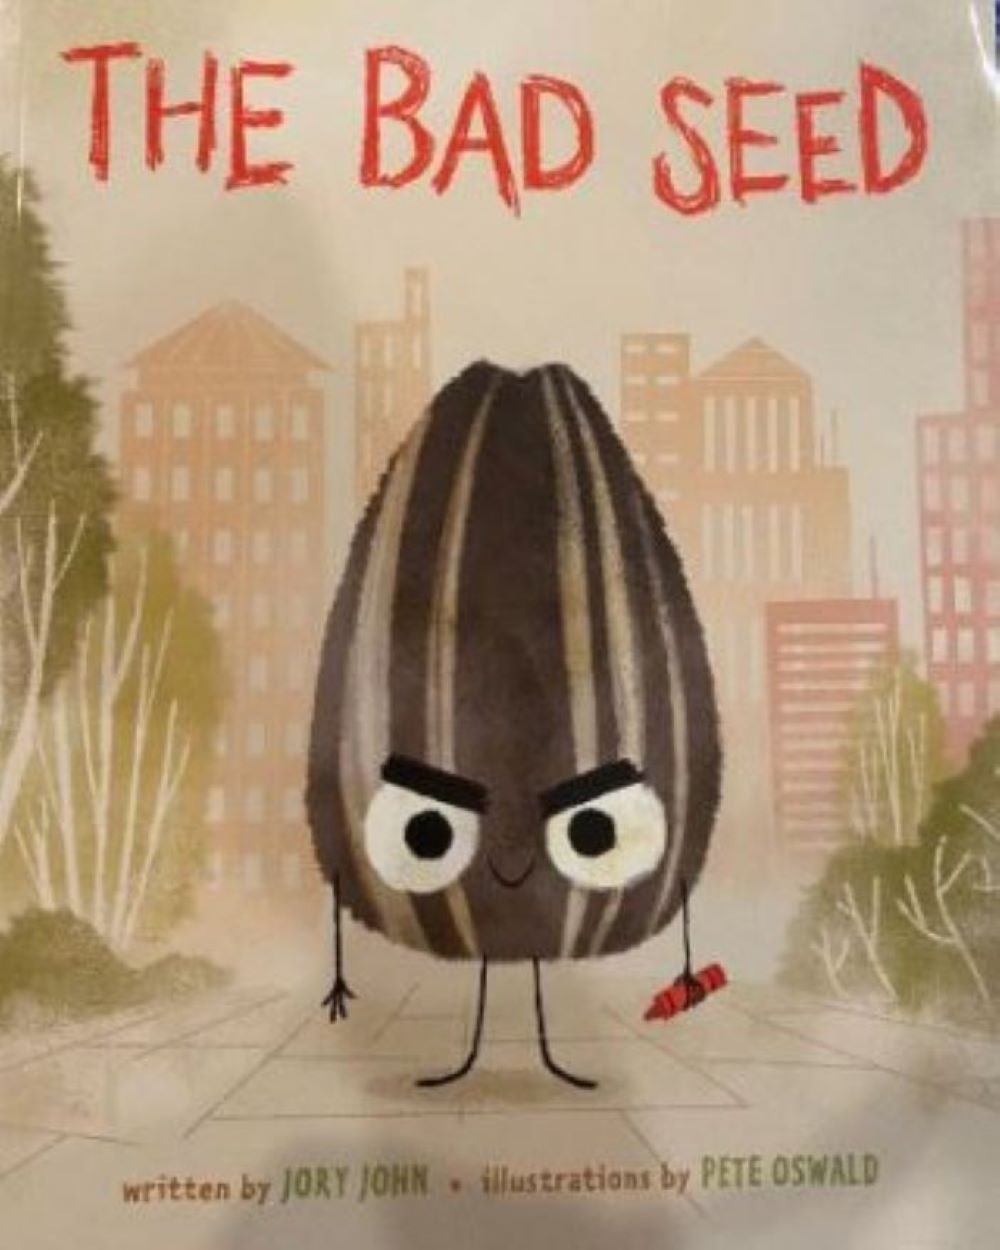 Review: The Bad Seed